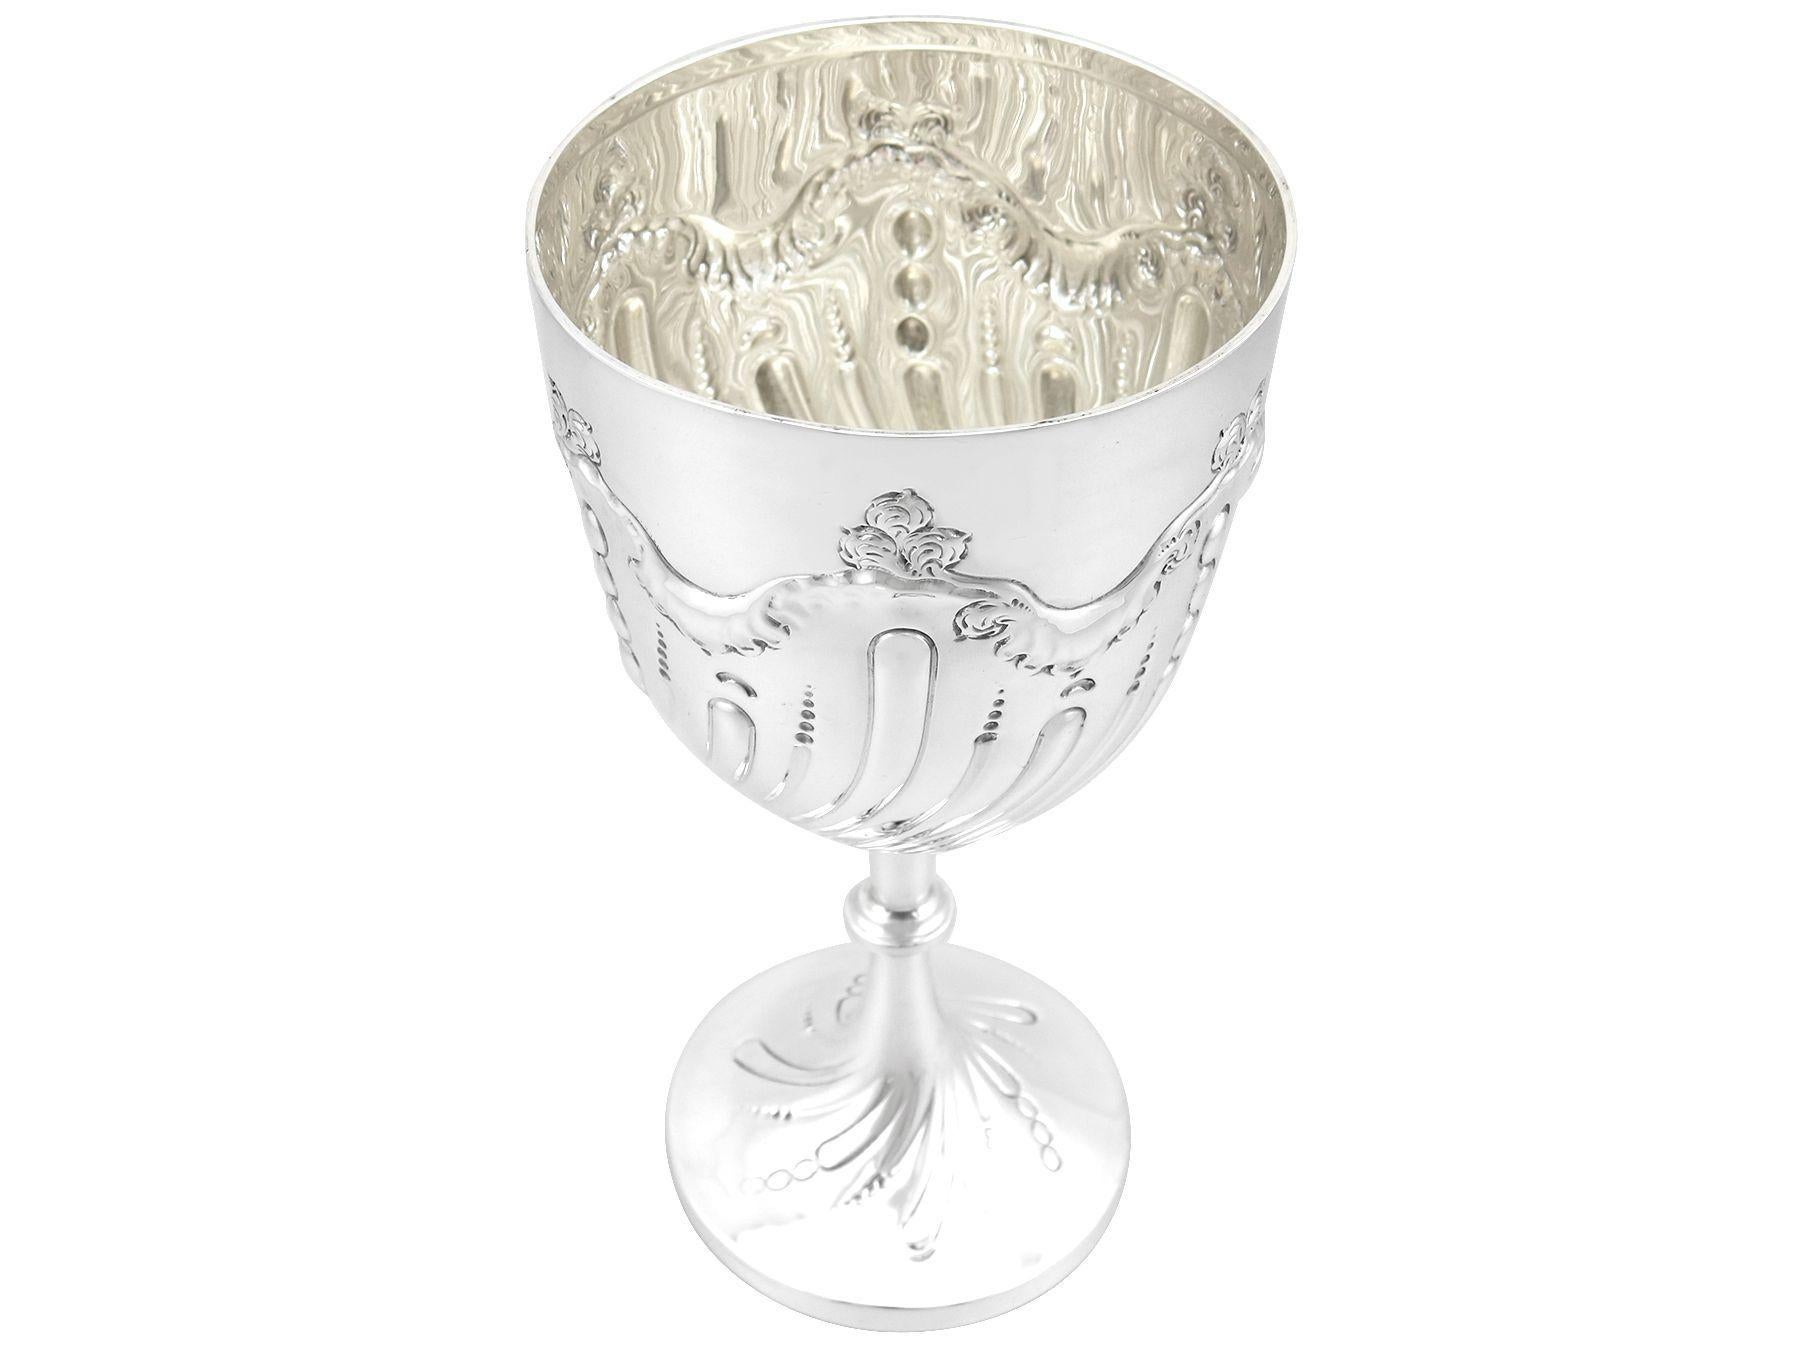 English Antique Edwardian Sterling Silver Presentation Cup, 1905 For Sale